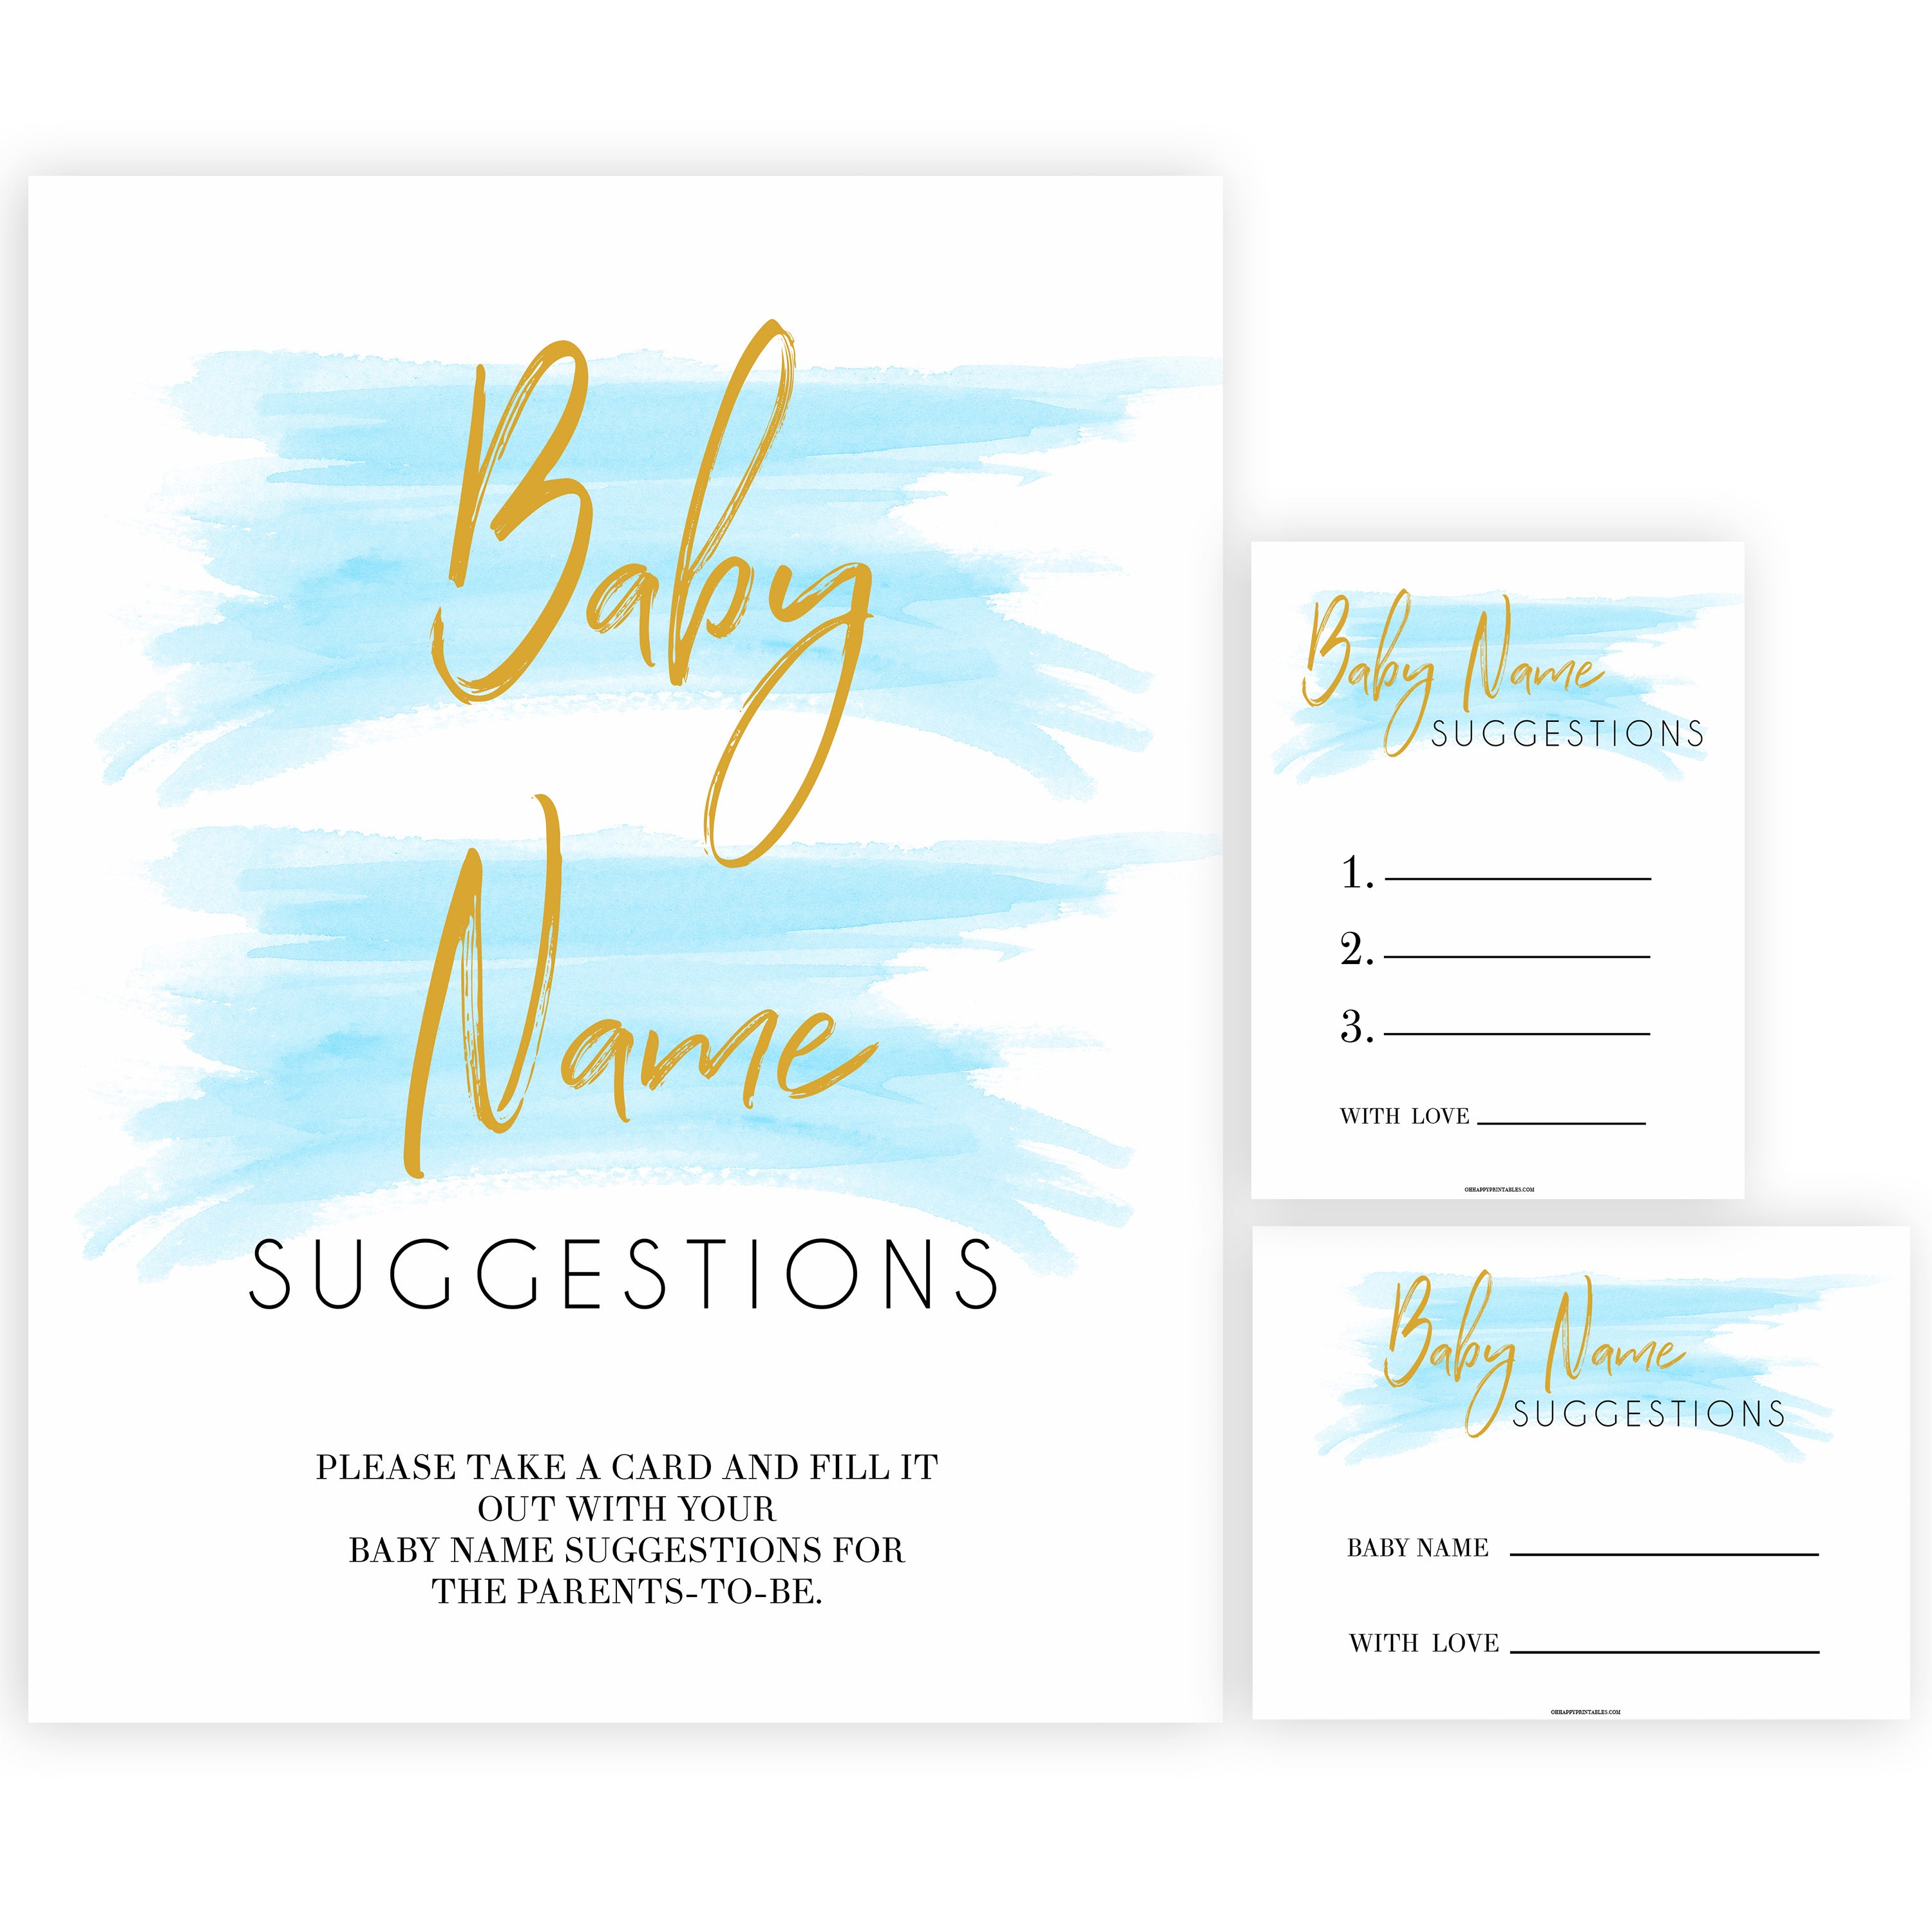 Blue swash, baby name suggestions baby games, baby shower games, printable baby games, fun baby games, boy baby shower games, baby games, fun baby shower ideas, baby shower ideas, boy baby games, blue baby shower